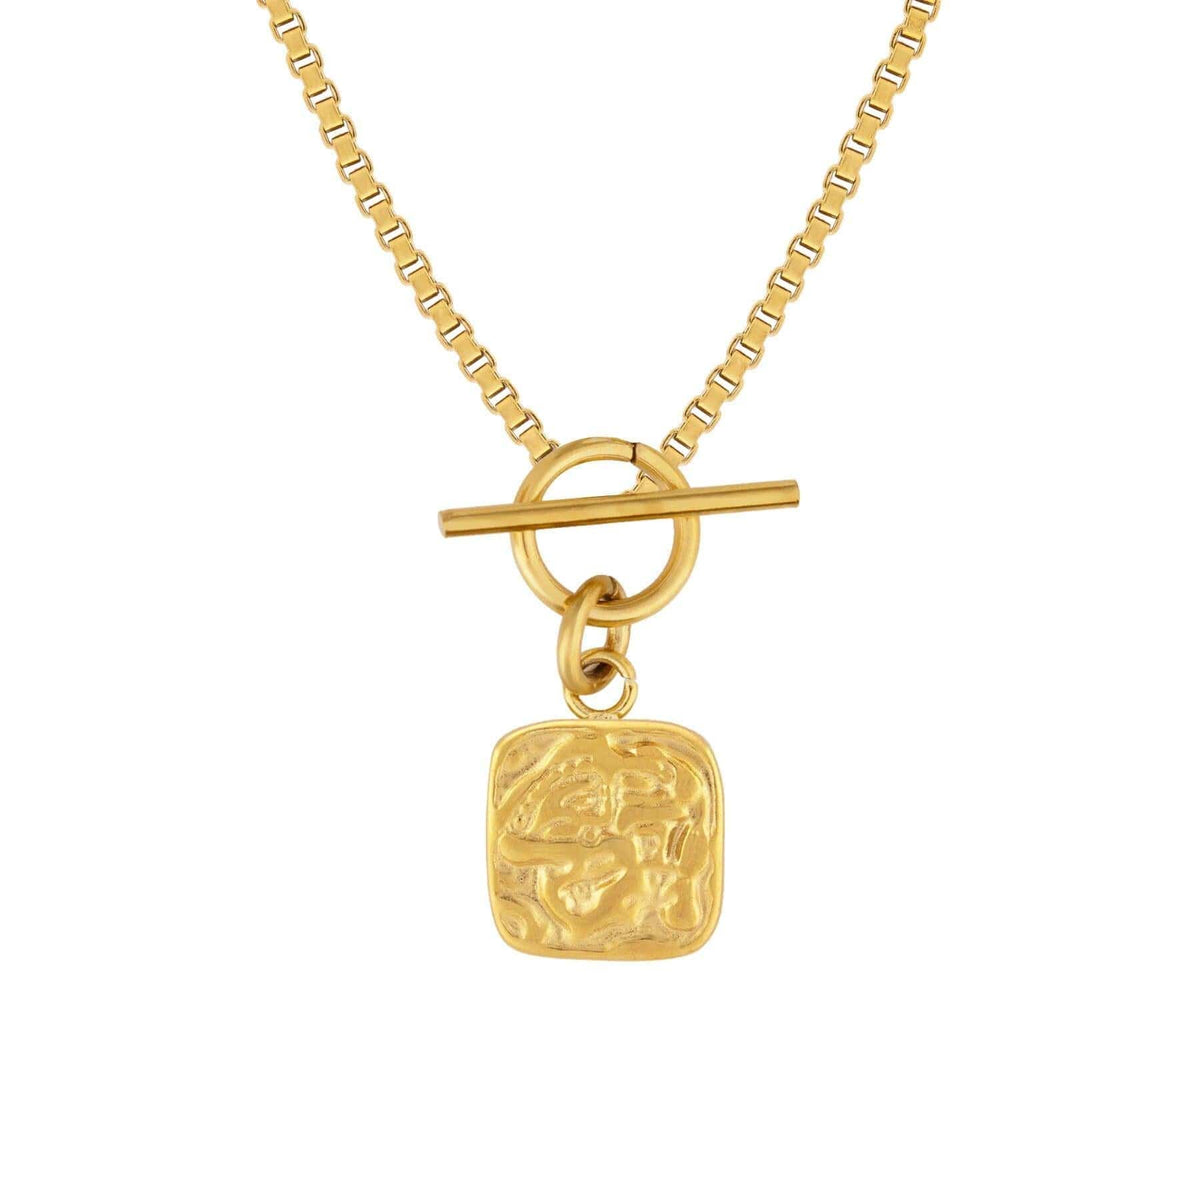 BohoMoon Stainless Steel Cayman Tbar Necklace Gold